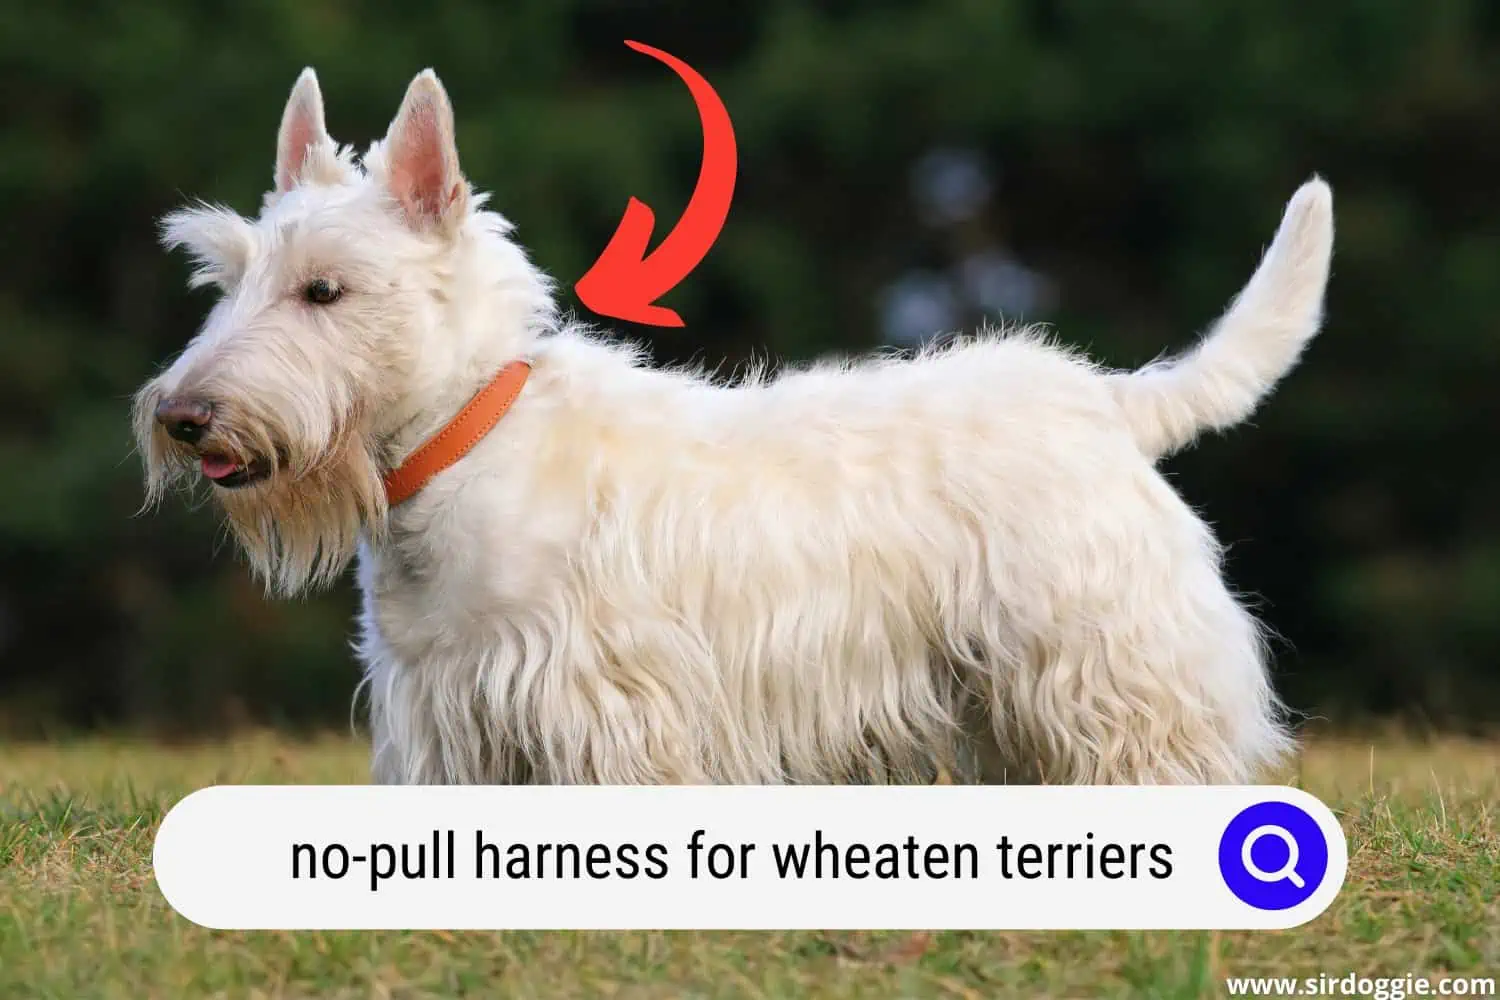 Wheaten Terrier wearing a red no-pull harness